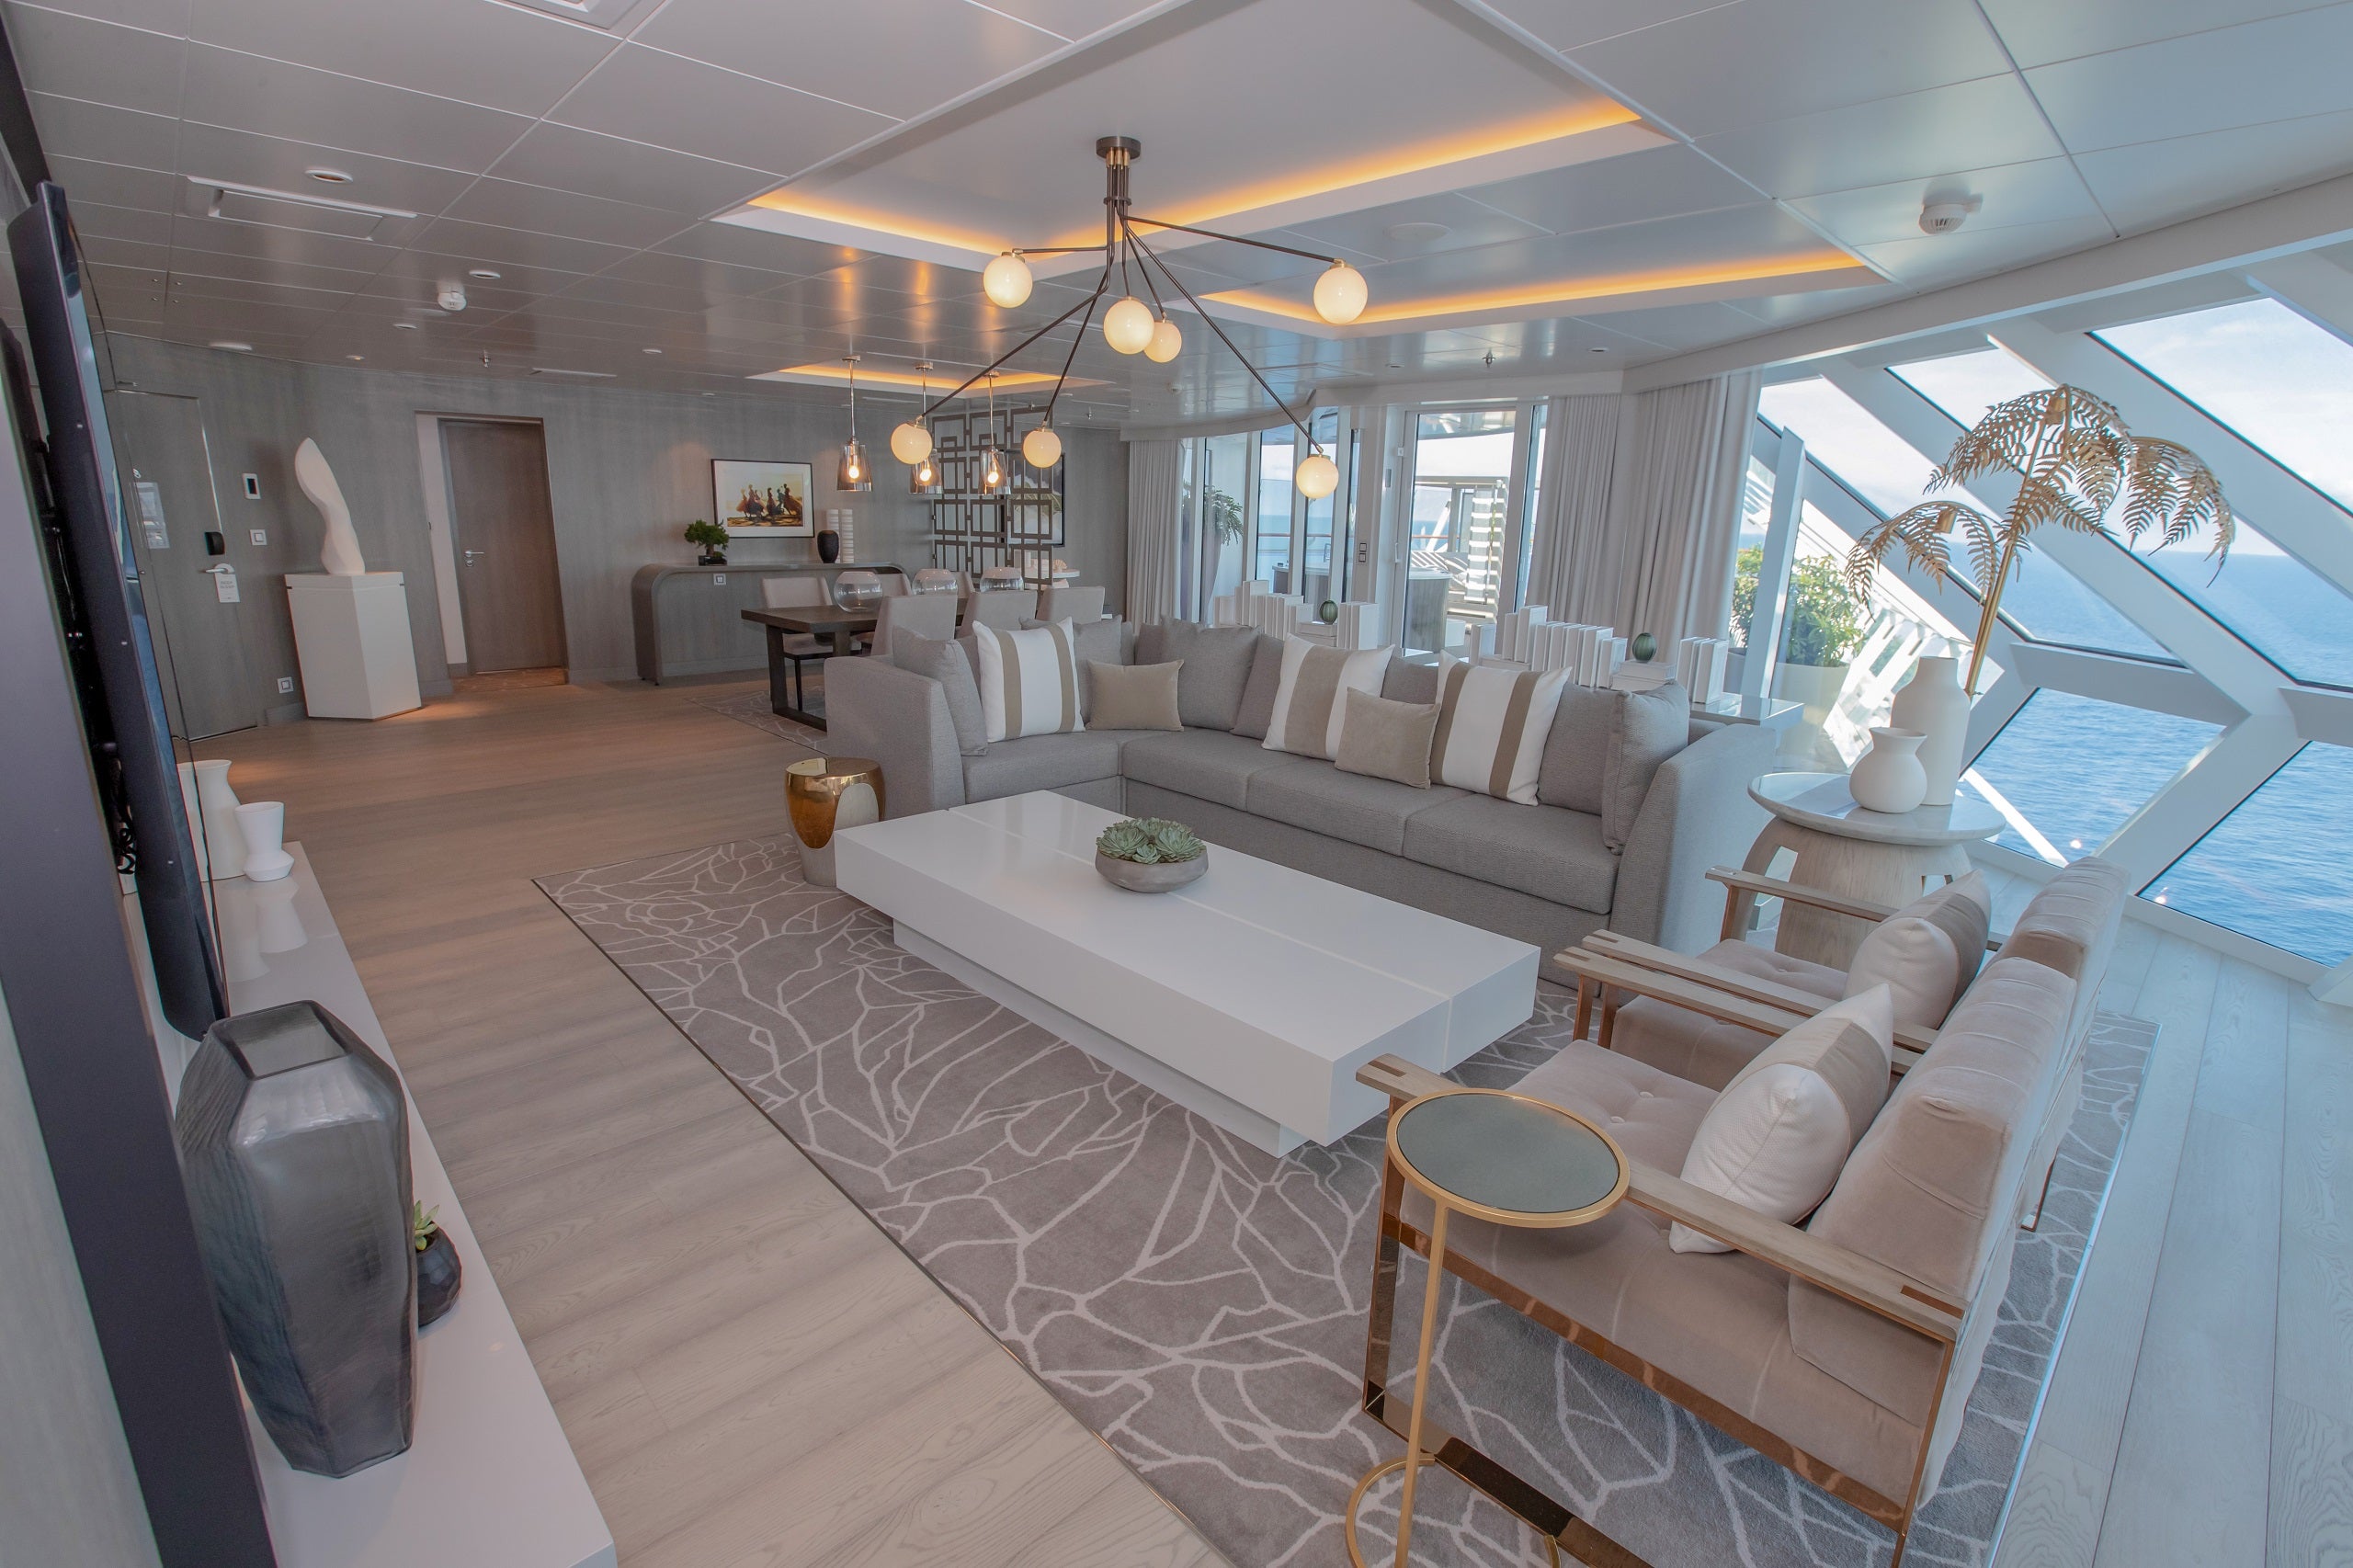 Celebrity Cruises cabins and suites guide -- everything you want to know